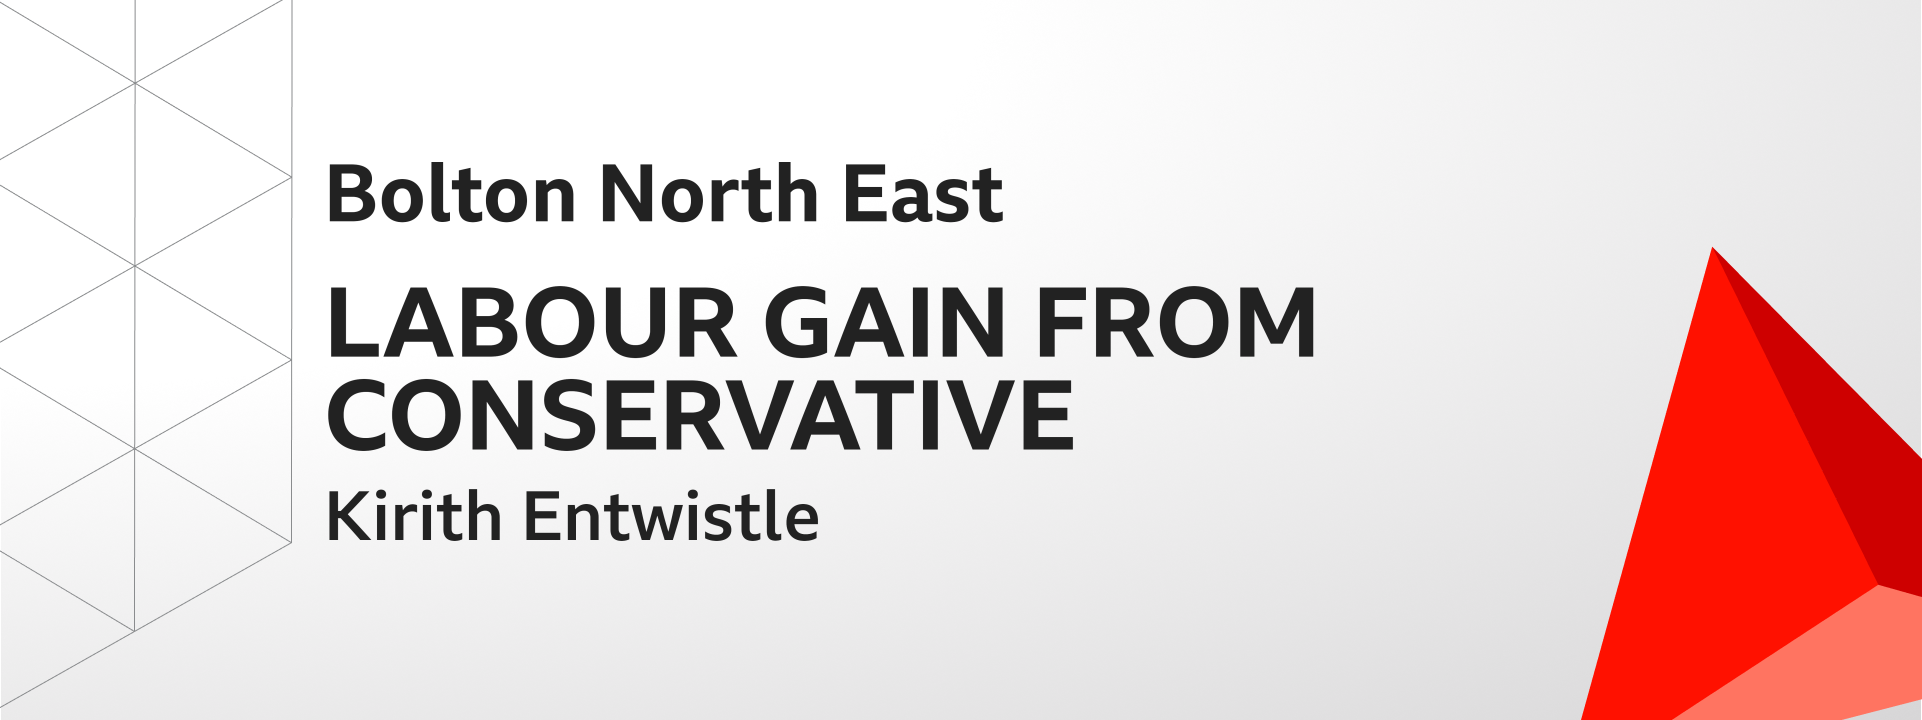 Graphic showing Labour gains Bolton North East from the Conservatives. The winning candidate was Kirith Entwistle.